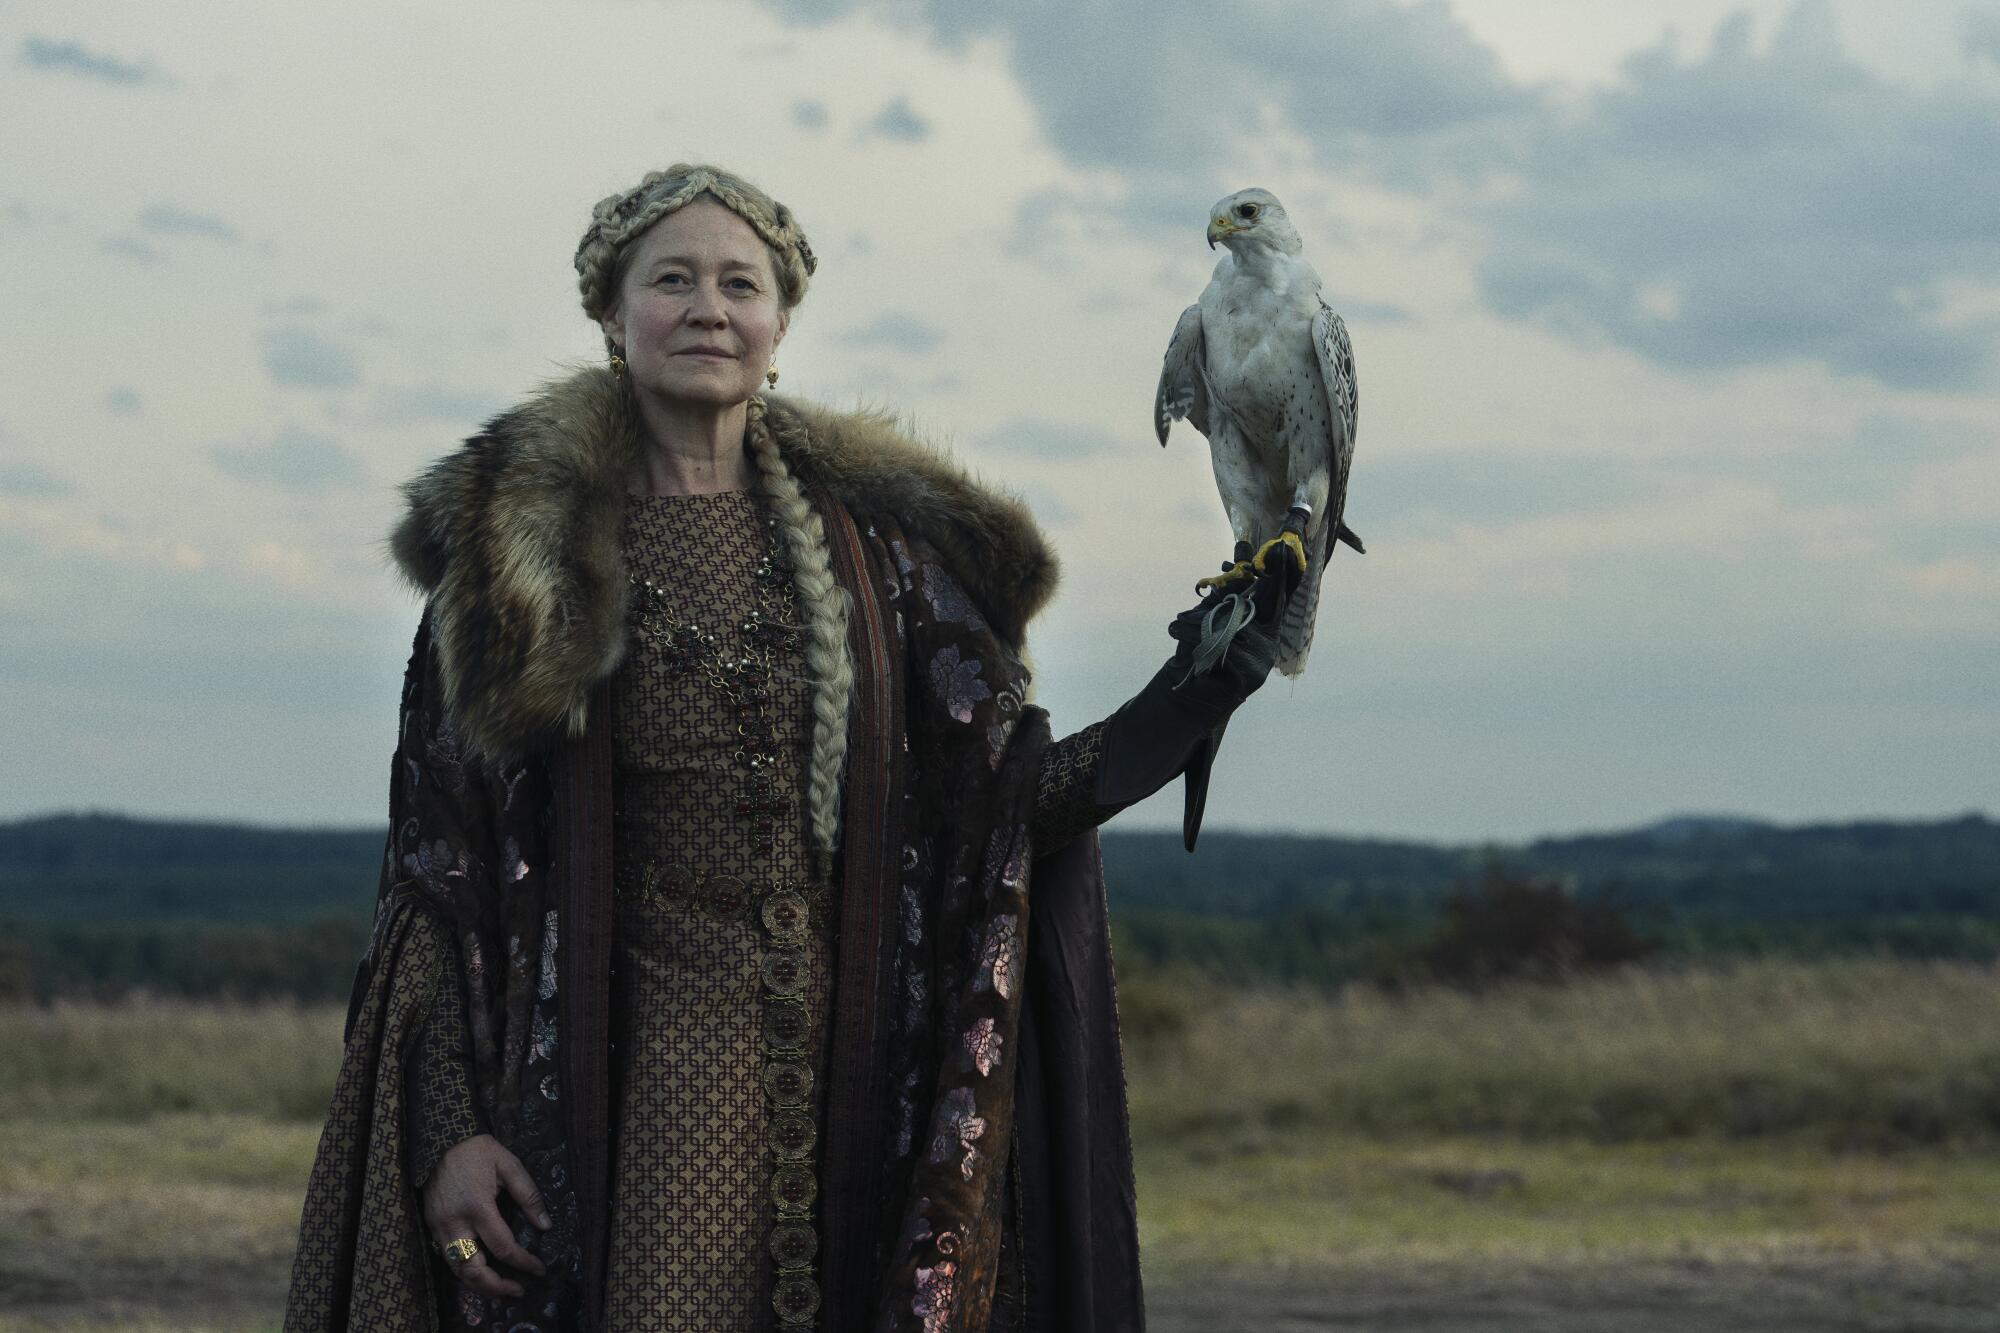 A woman in a fur-collared cape stands outdoors holding a bird of prey on her hand.